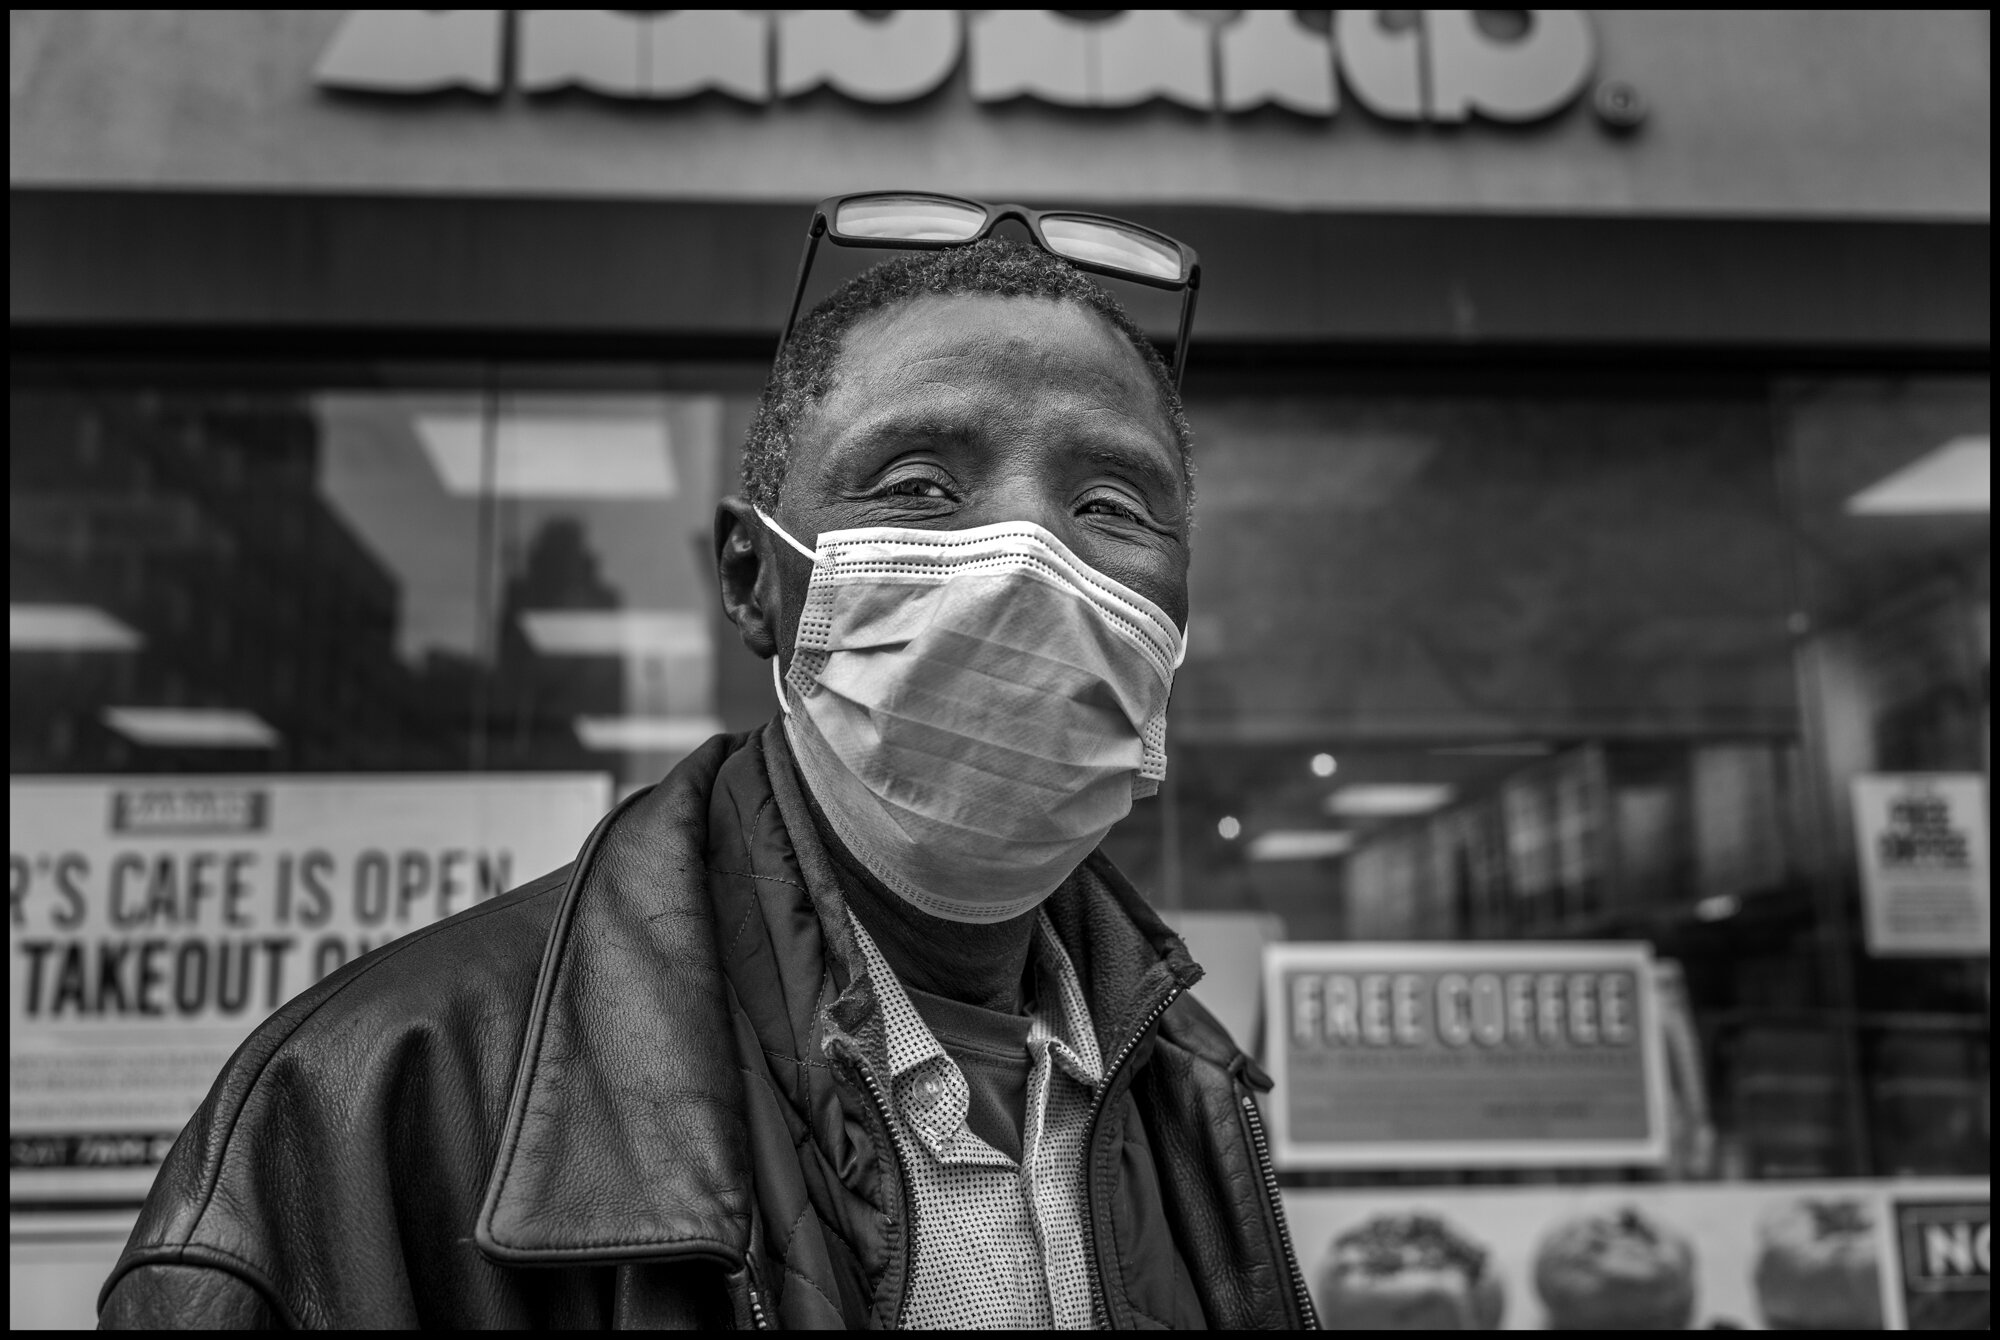  Sy, originally from Senegal, waits to shop at Zaybars on he Upper Westside.   March 31, 2020. © Peter Turnley.   ID# 09-007 